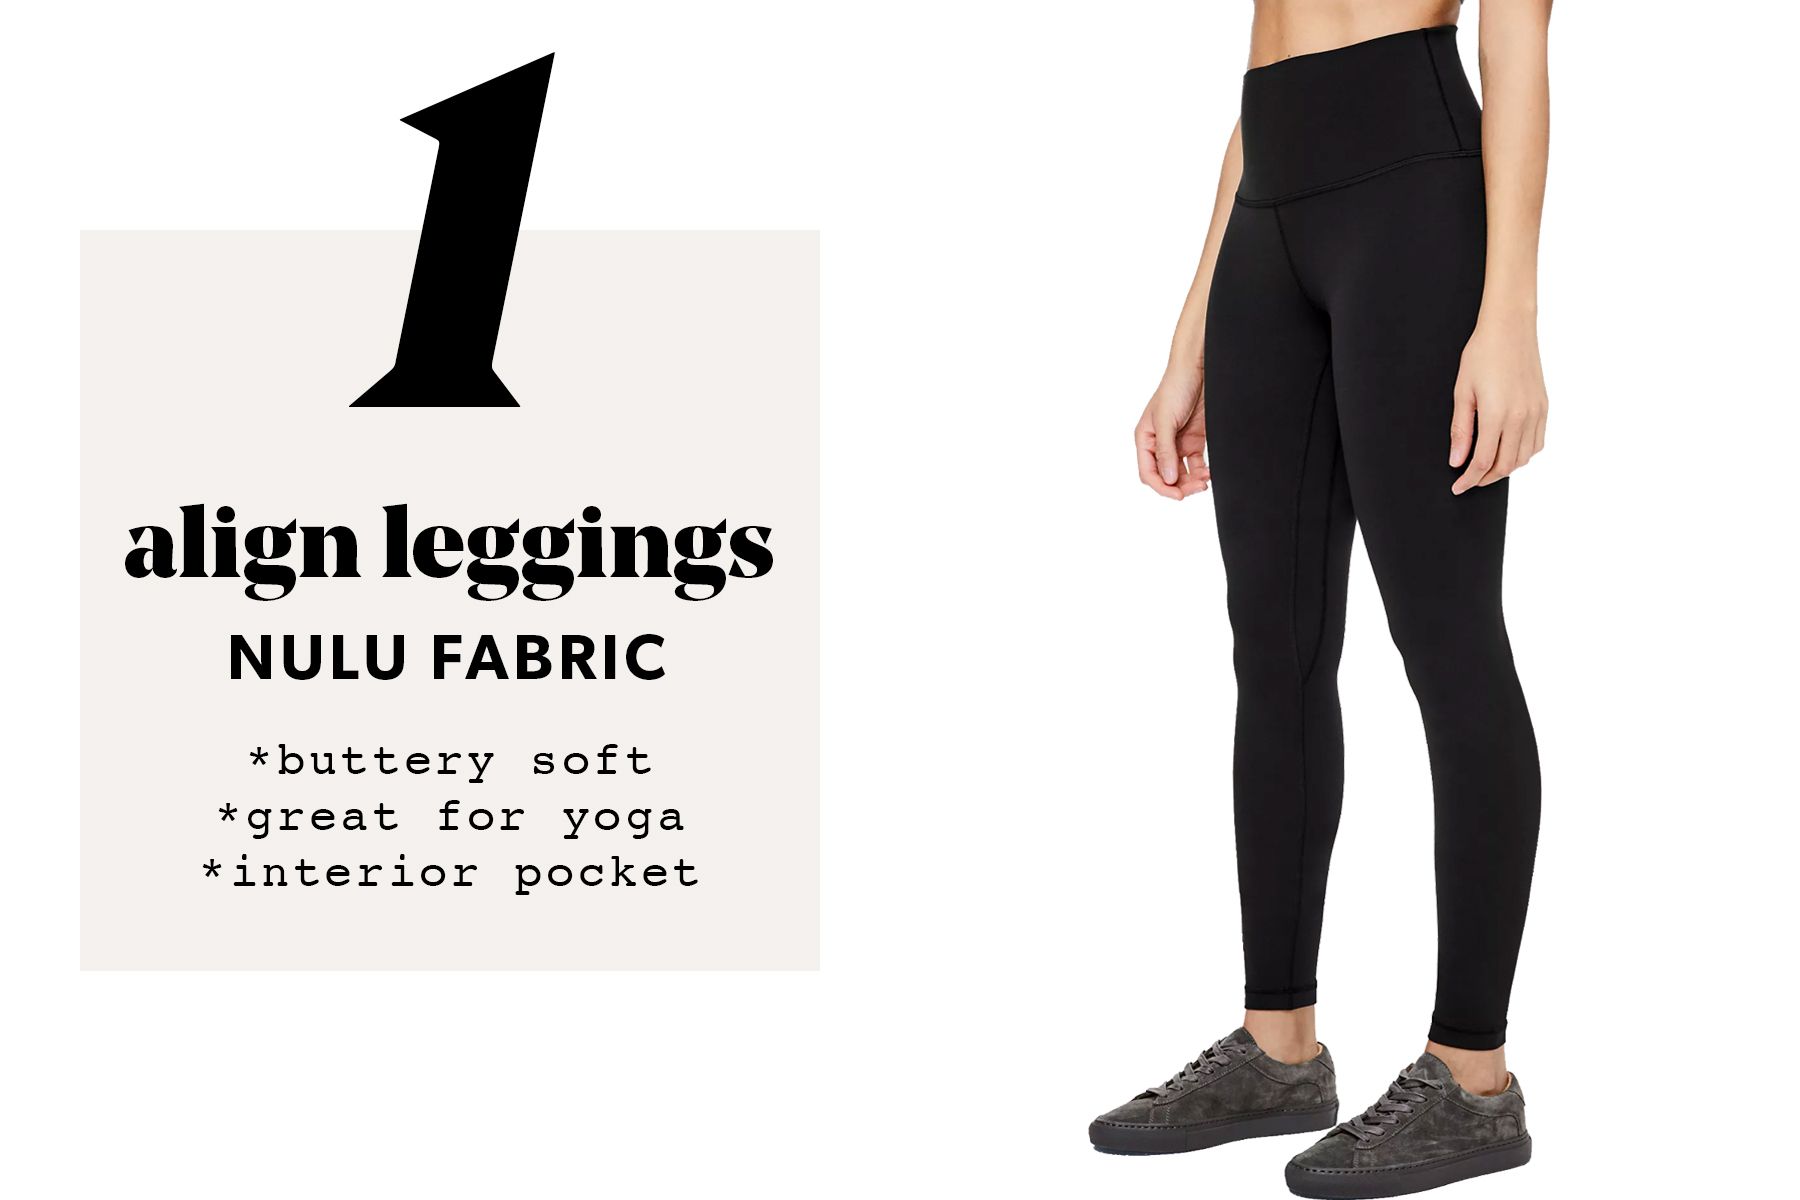 Prime Wardrobe: Try These 5 Pairs of Leggings at Home for Free | Us Weekly